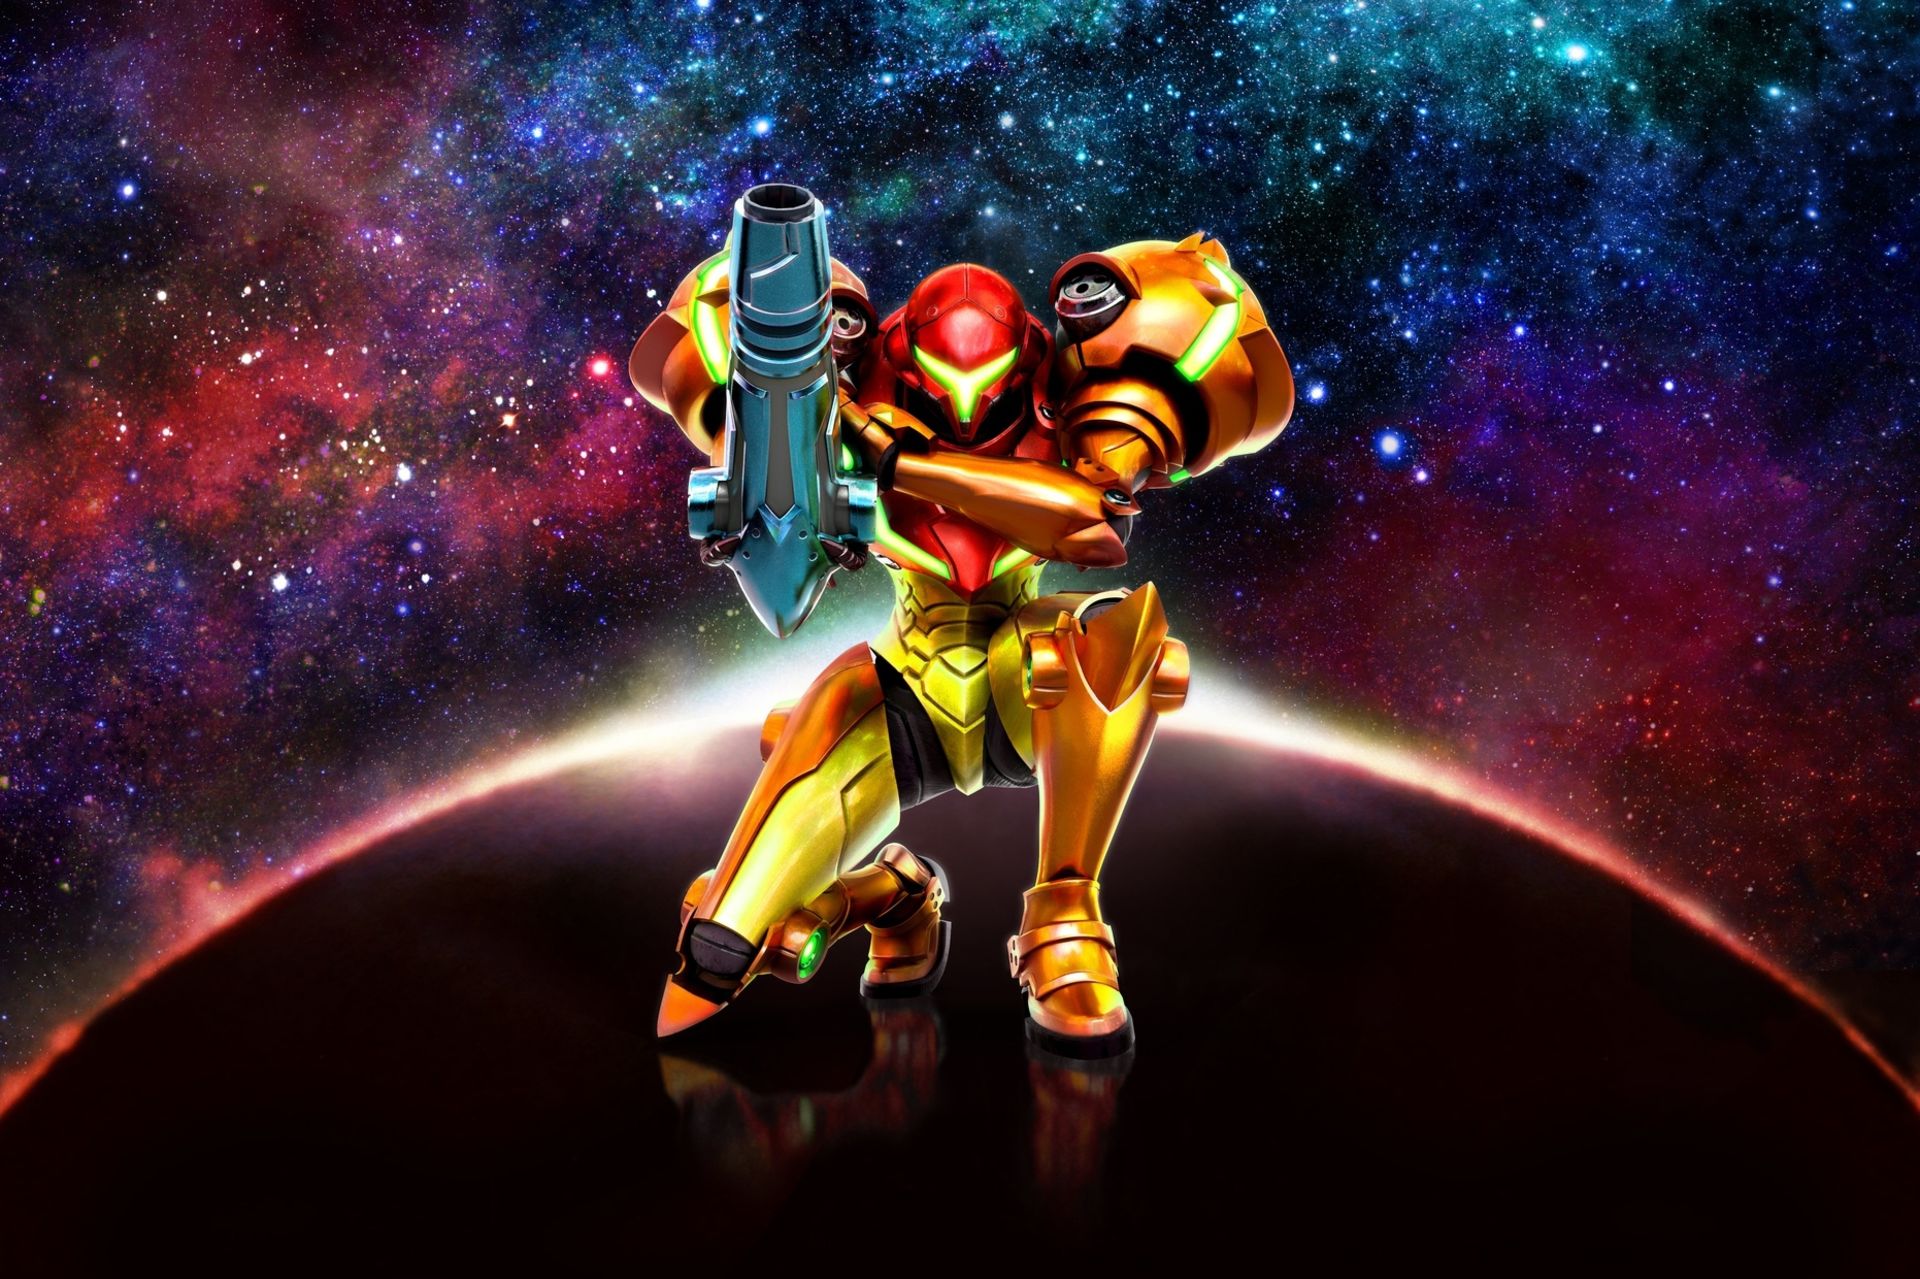 when is metroid coming to switch